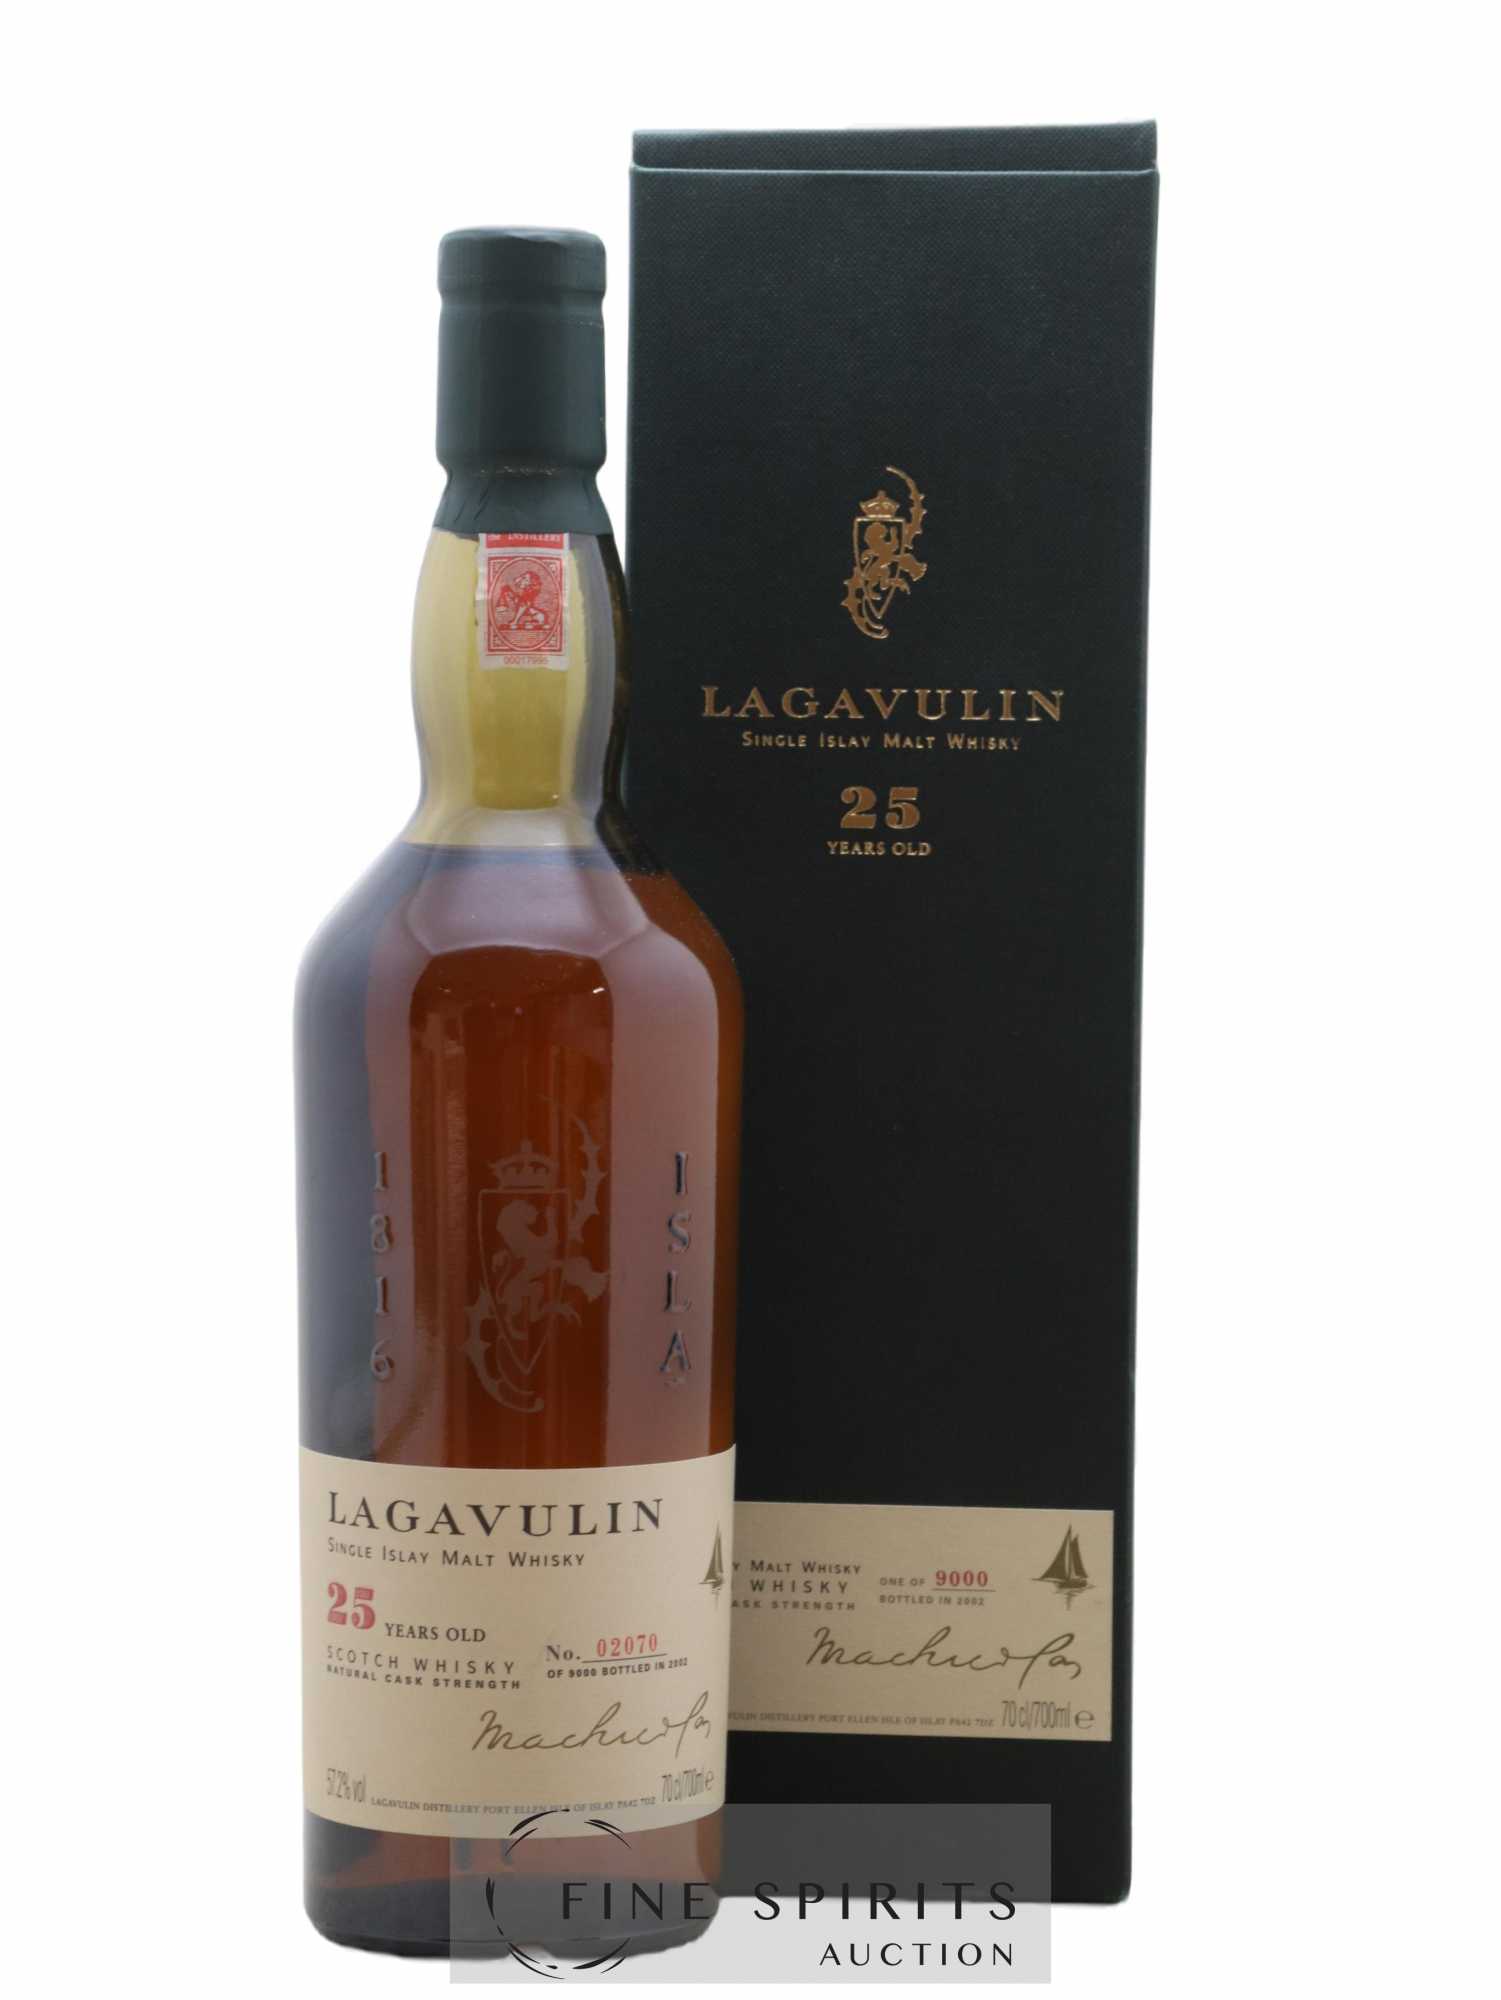 Lagavulin 25 years Of. Natural Cask Strength One of 9000 - bottled 2002 